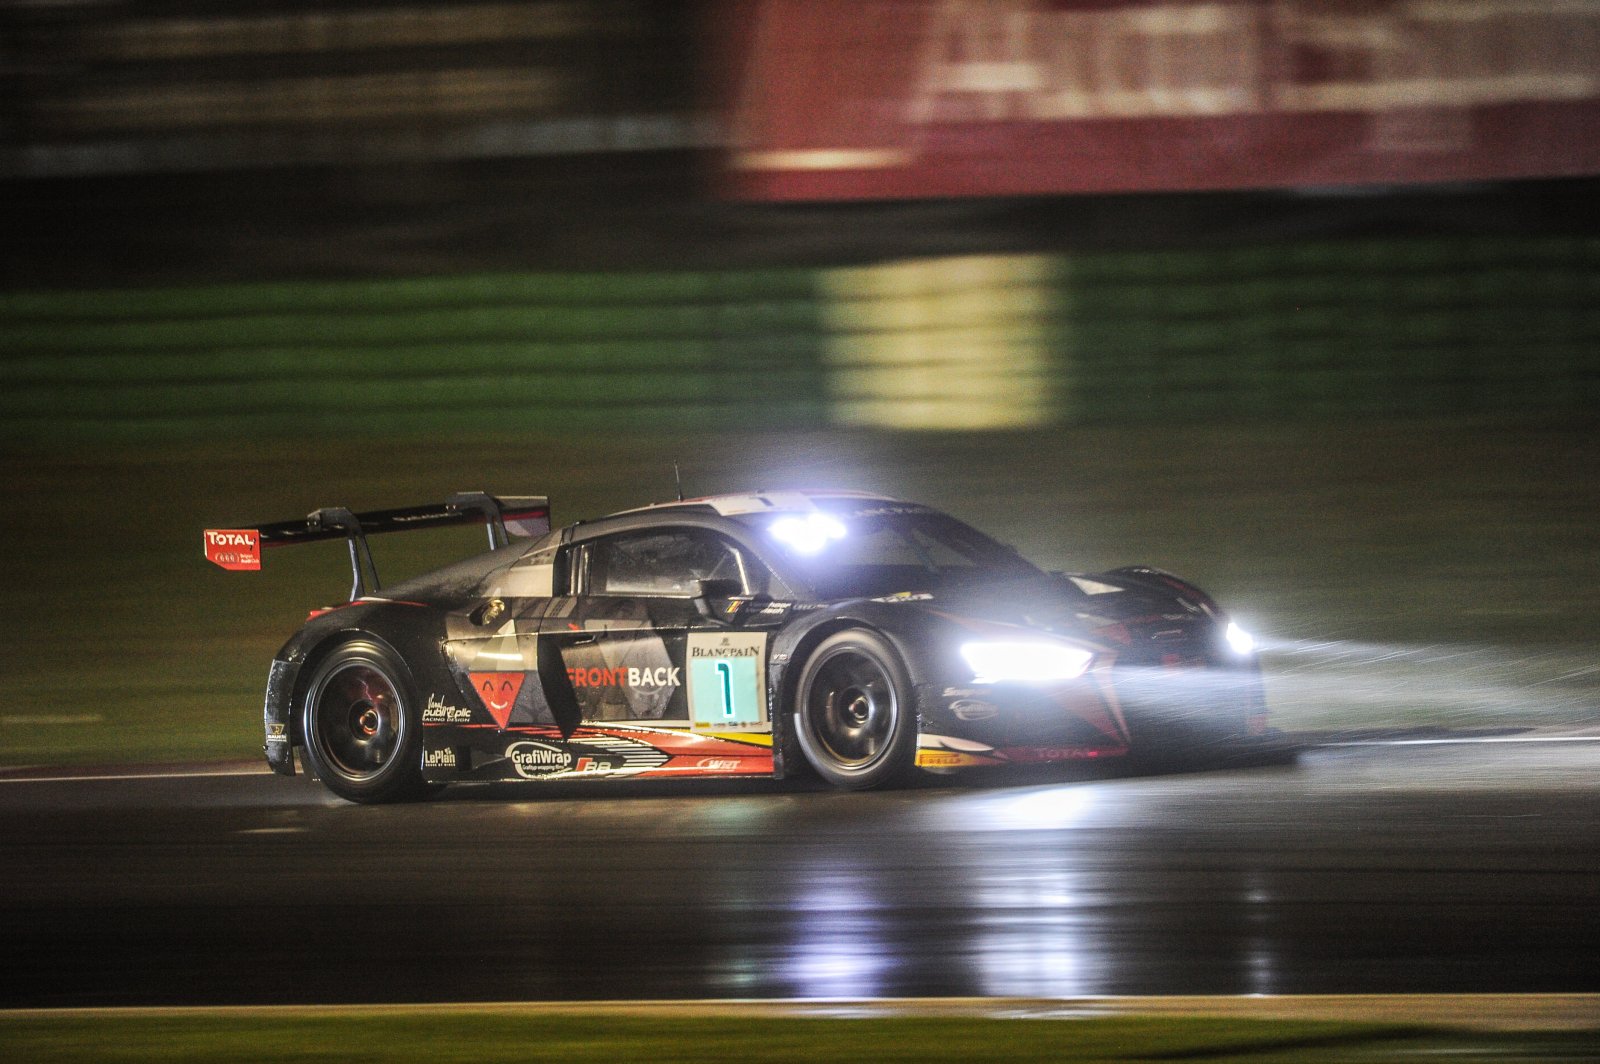 Laurens Vanthoor and Audi fastest on a very wet Misano World Circuit